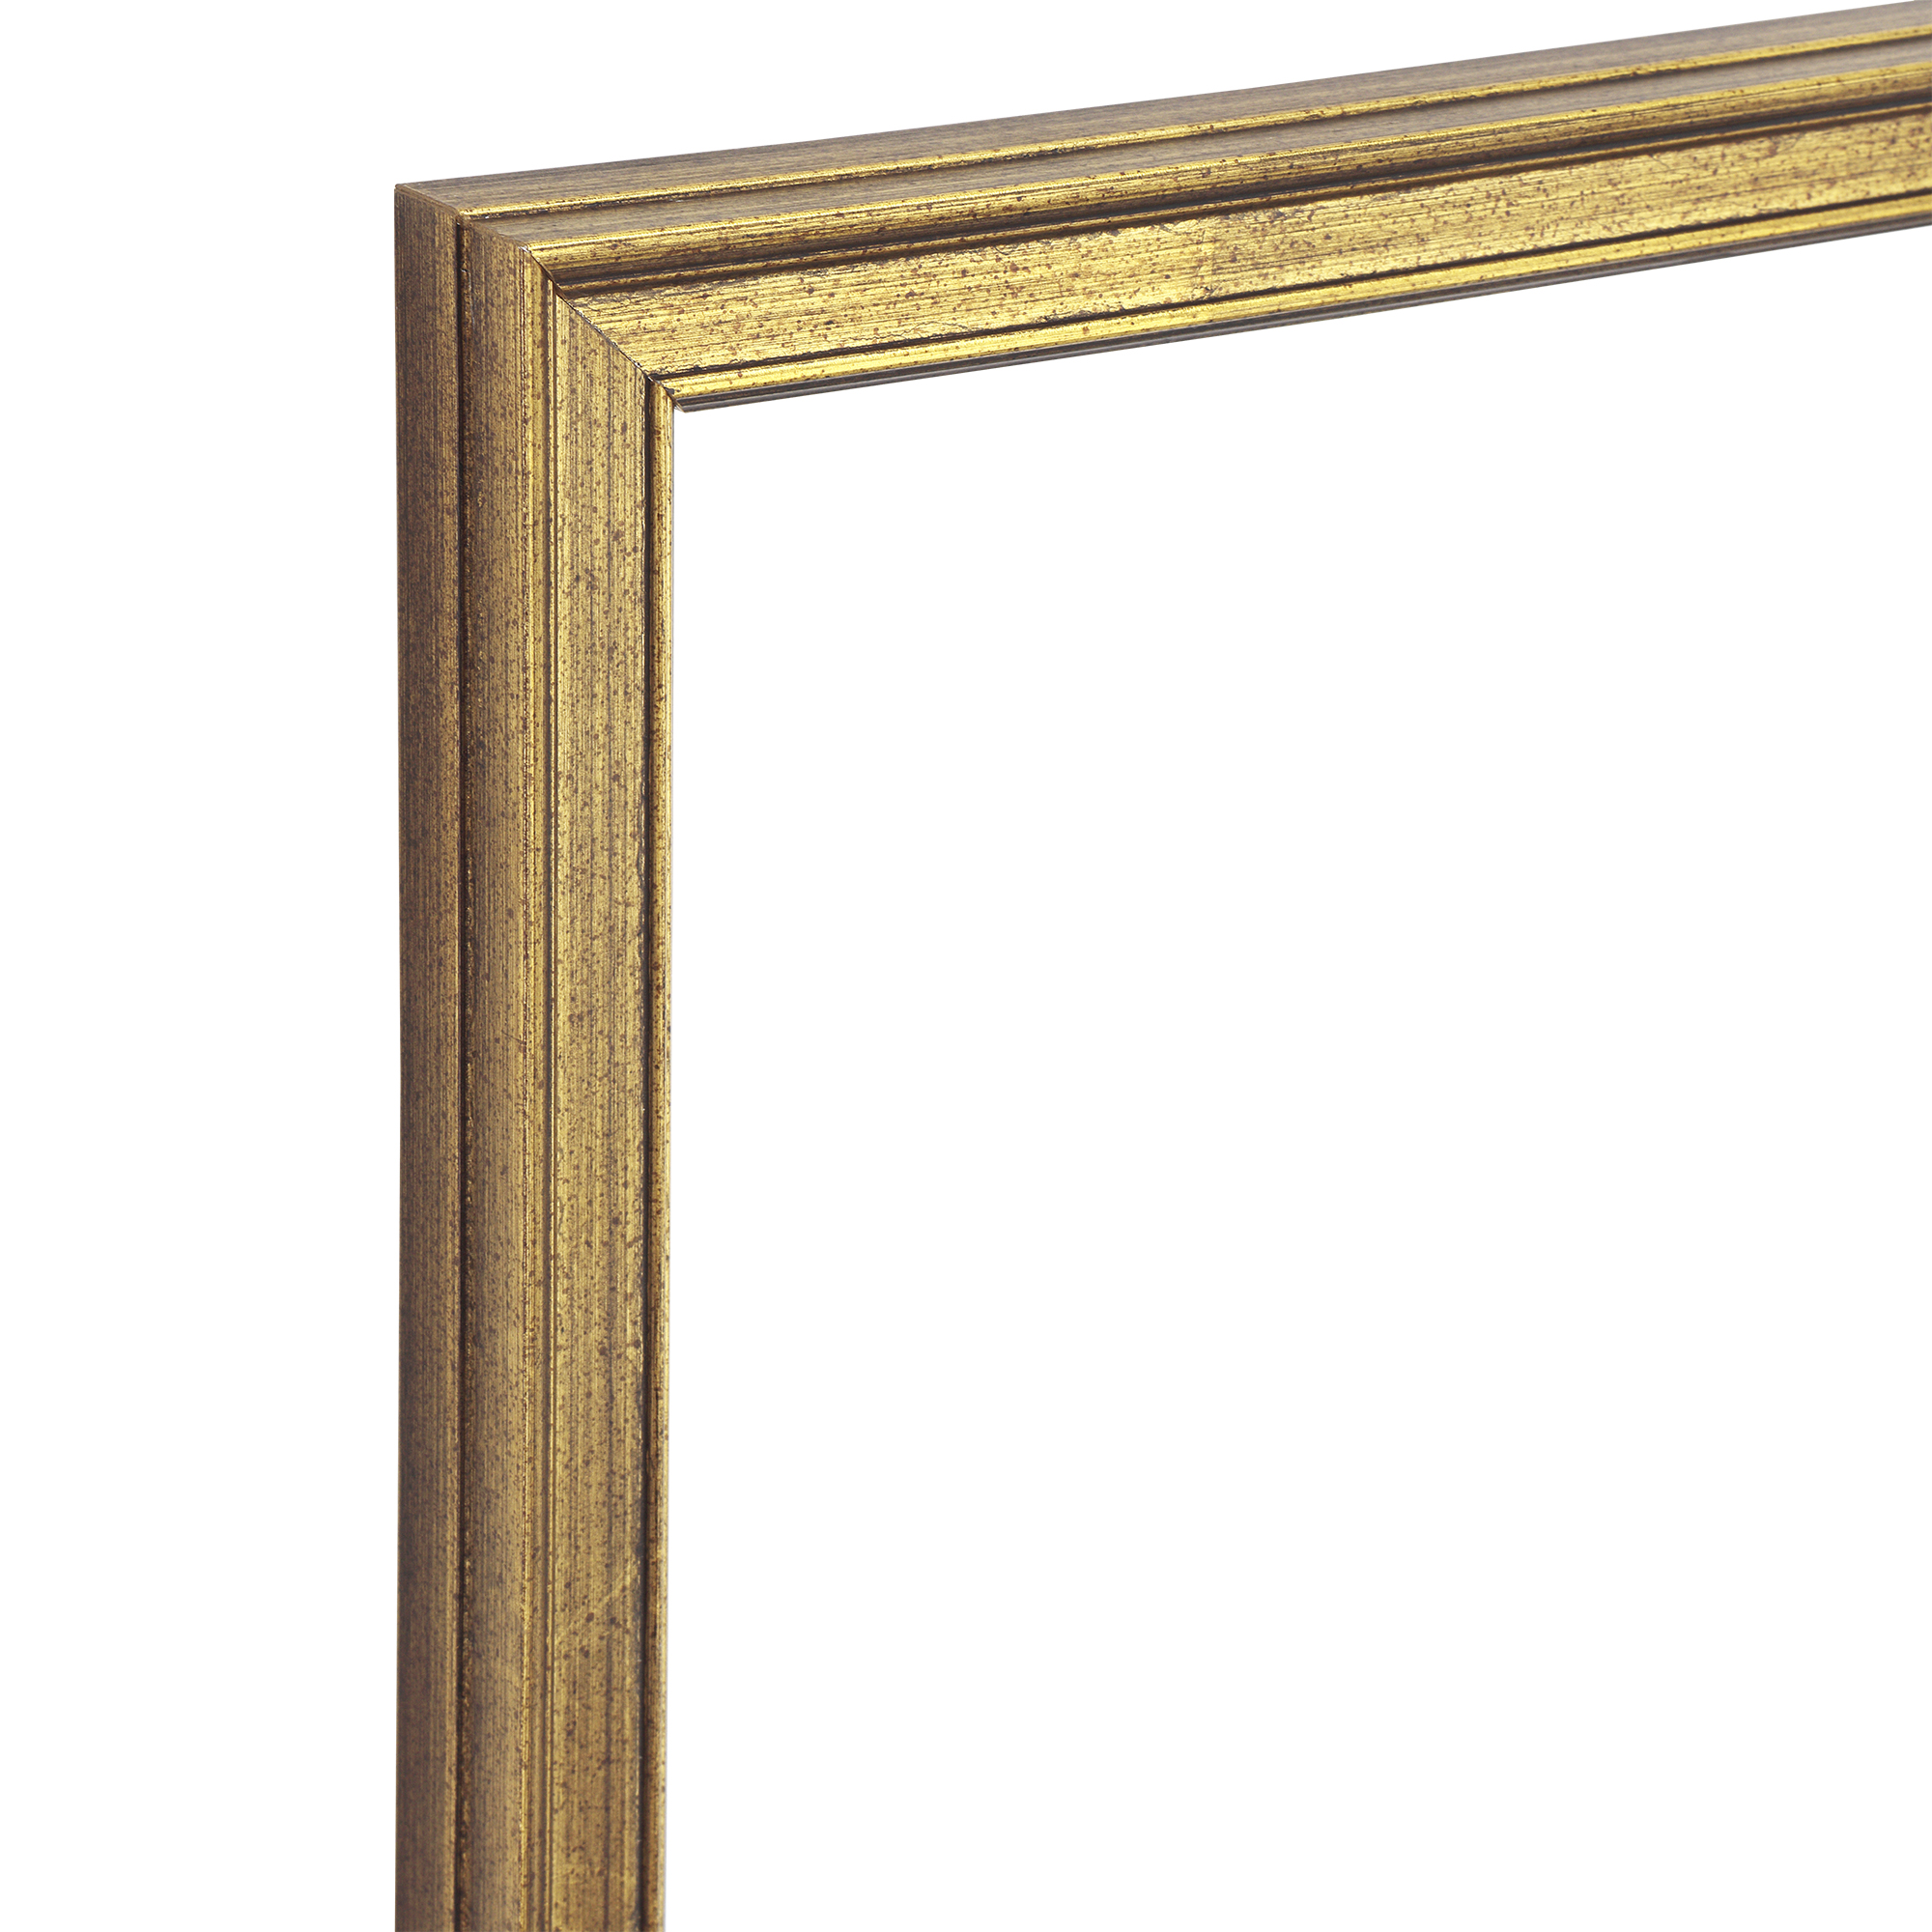 MUseum Collection Piccadilly Artist Vintage Picture Frames - 6x8 Gold - Single Frame for 3/4 Thick Canvas, Paper and Panels, Museum Quality Wooden Antique Photo Frame - image 2 of 4